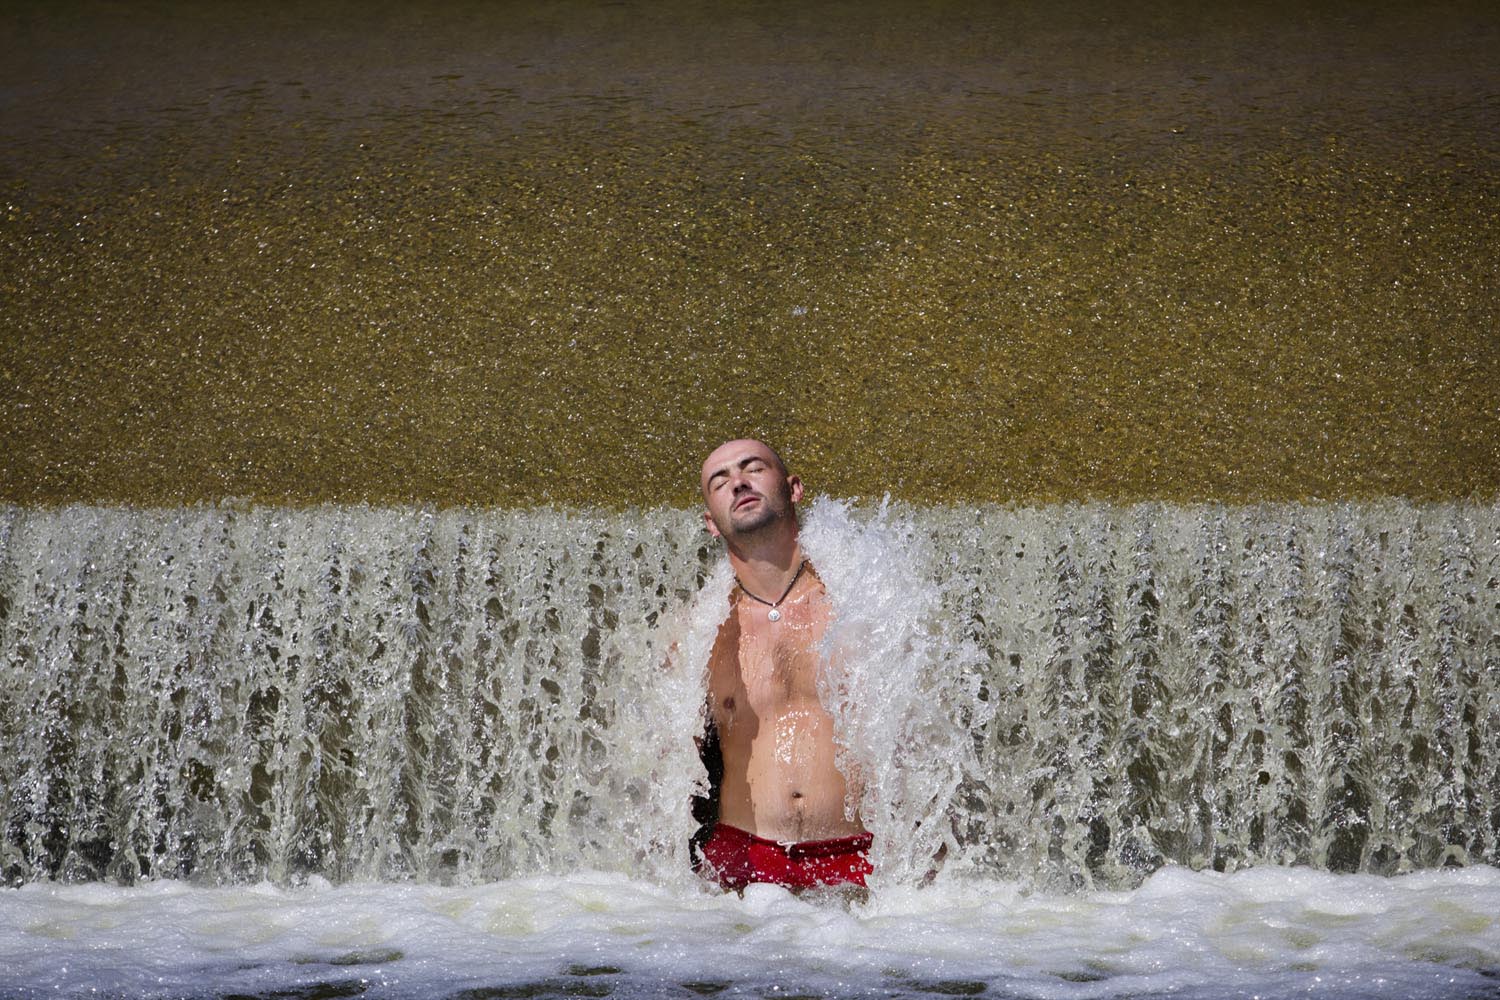 July 28, 2013. A man cools off at a weir of the Berounka river near Dobrichovice, Czech Republic.